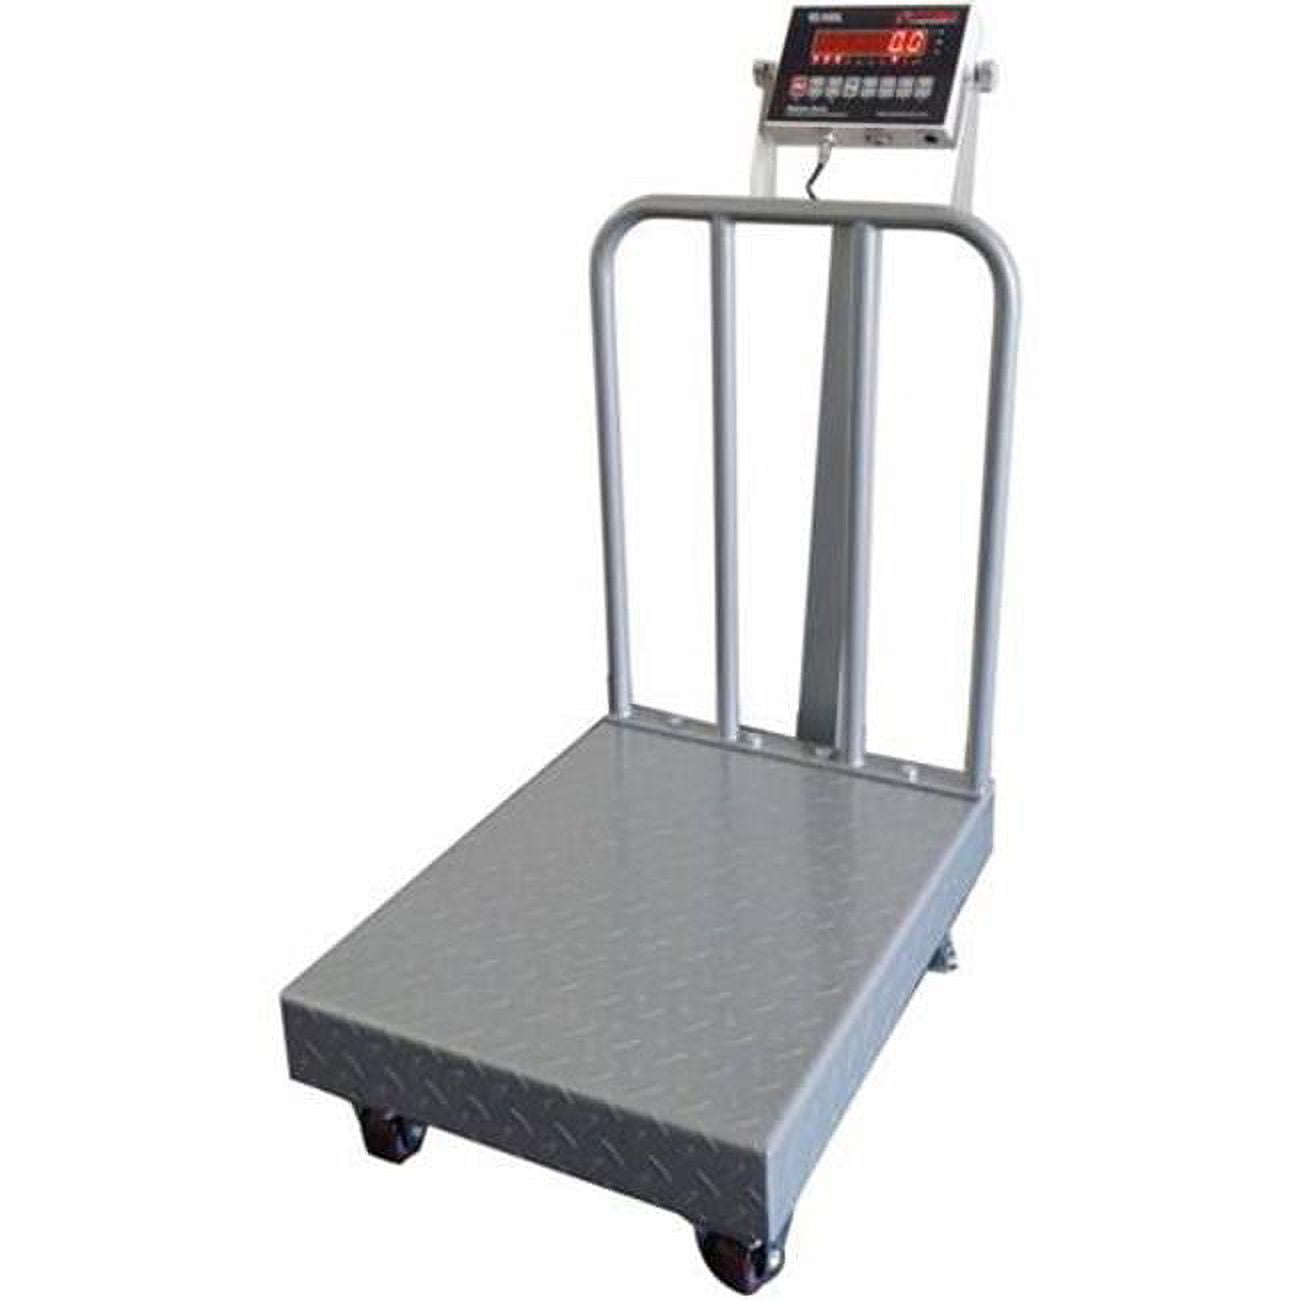 500 lb x 0.1 lb Bench Scale - NTEP with wheels and backrail